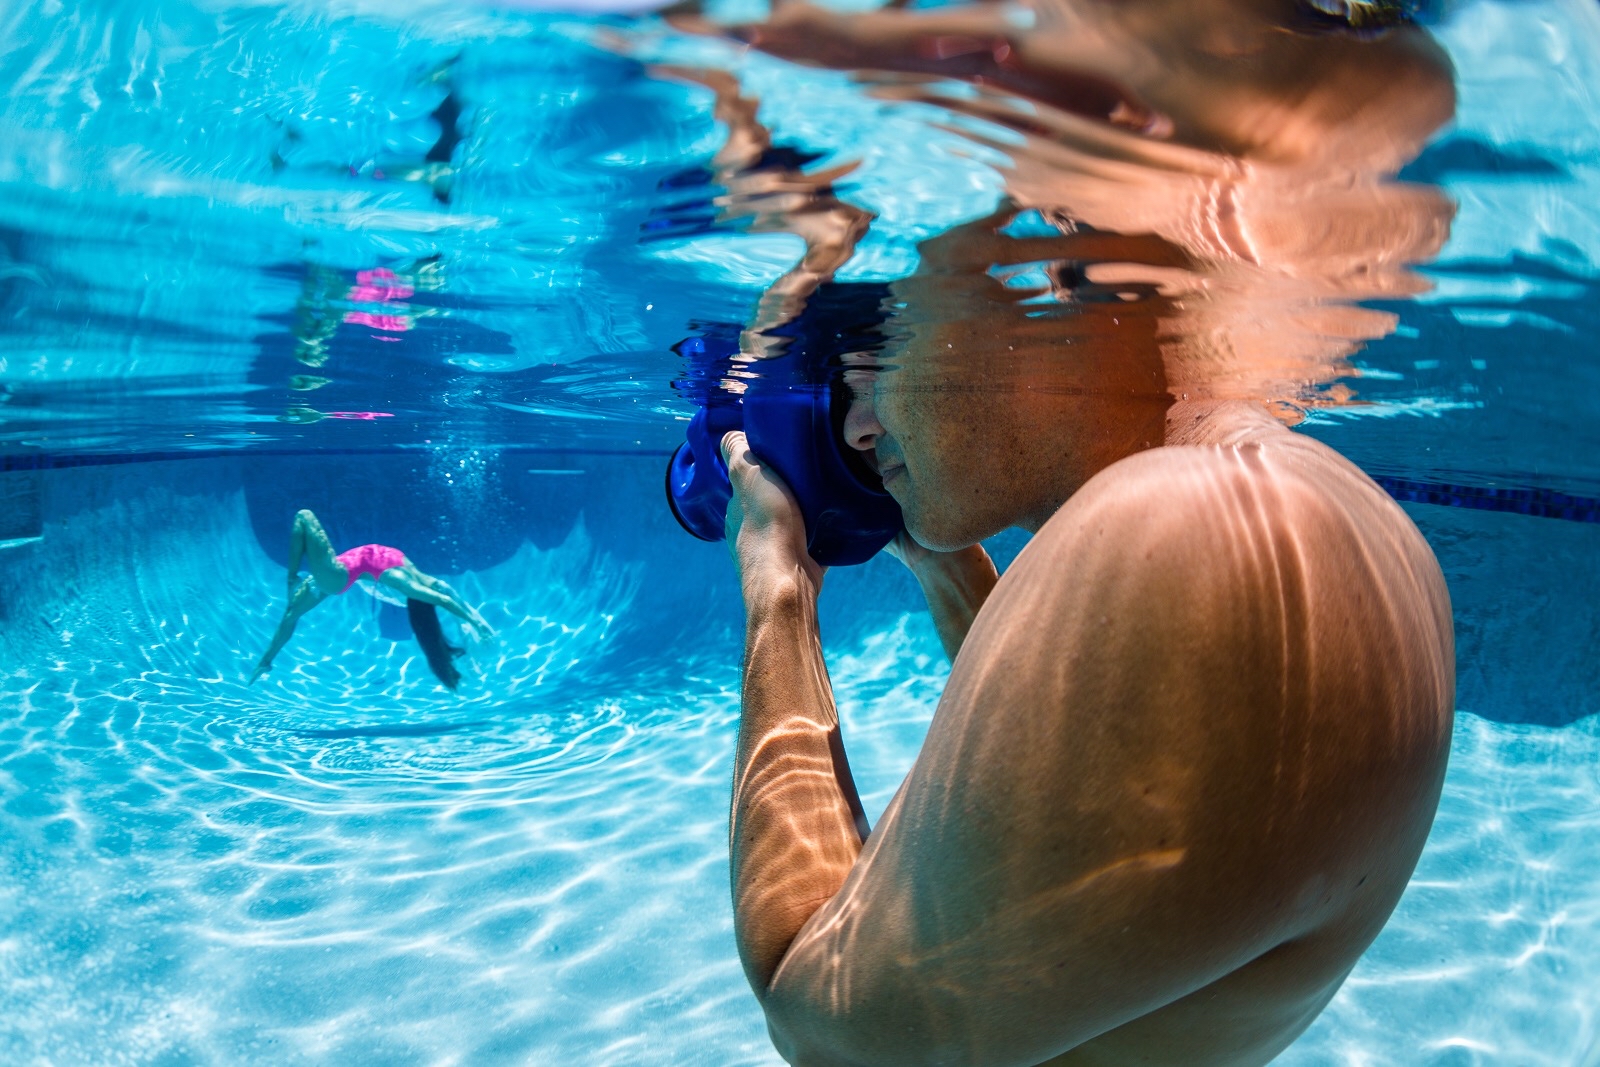  Taking photos in a pool is one of the easiest way to get started in Underwater Photography. 